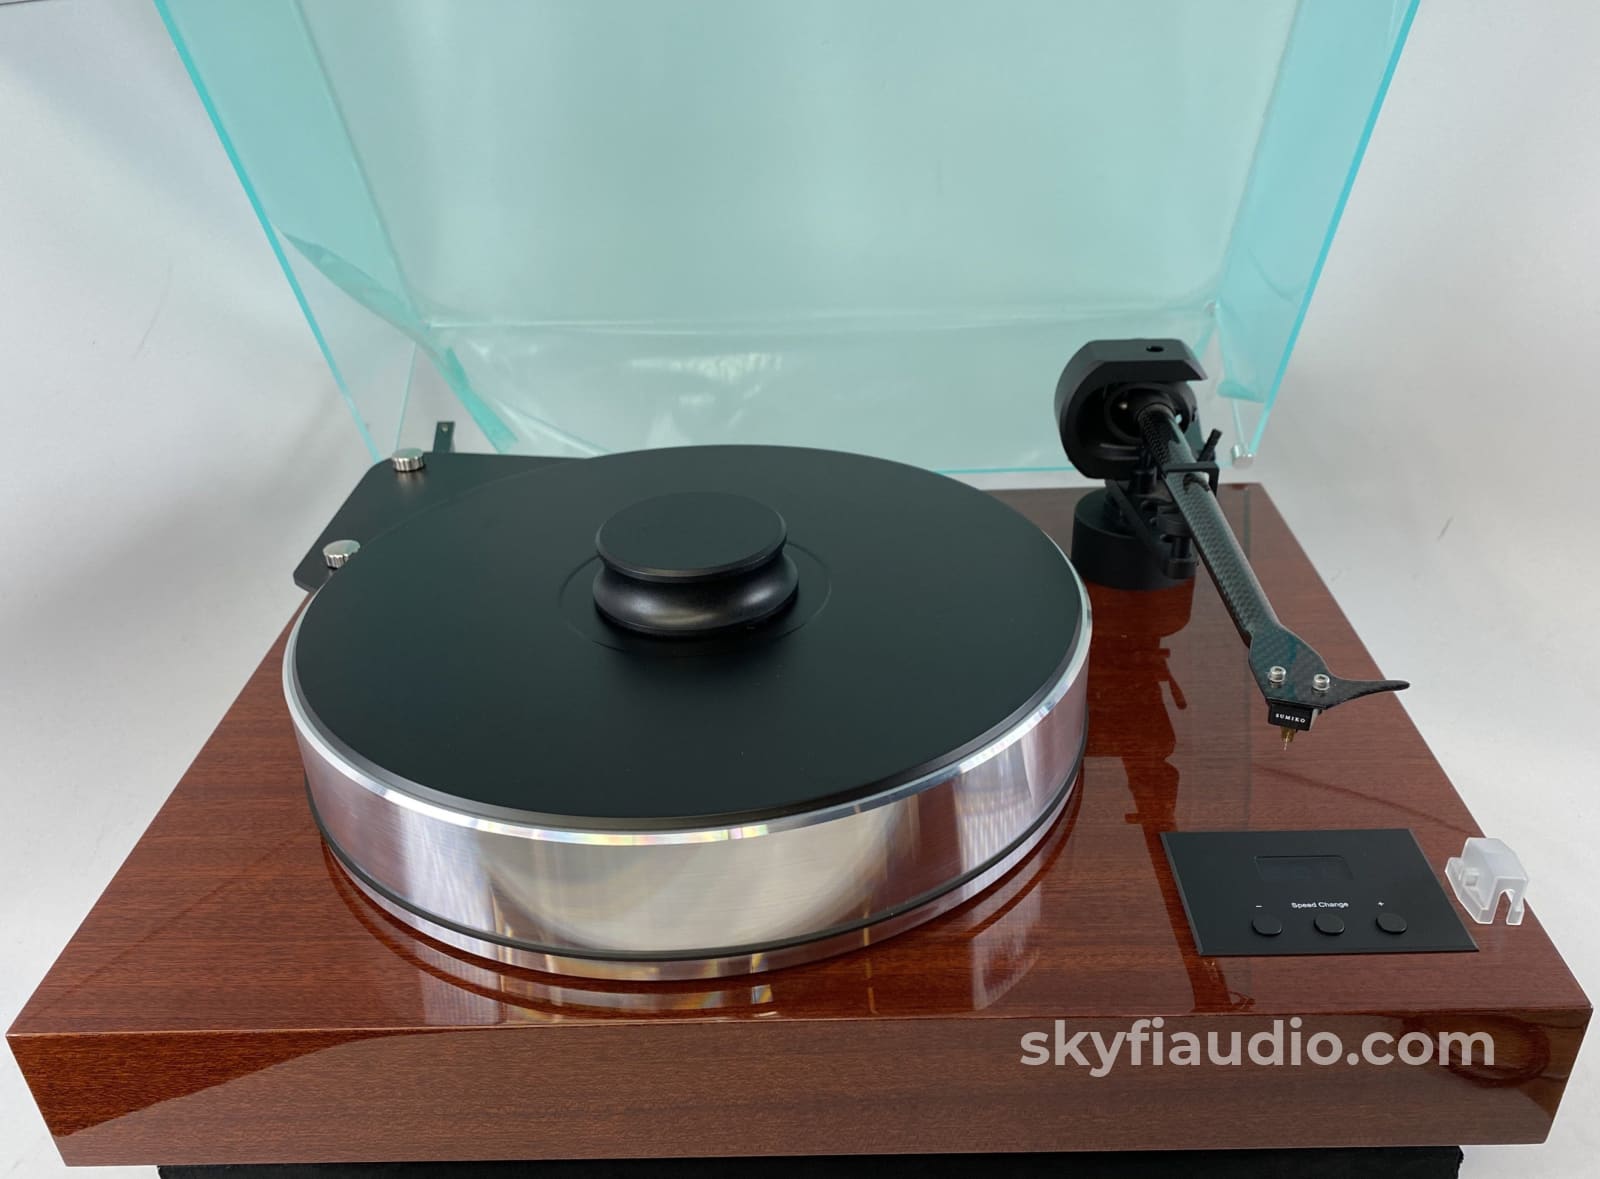 Pro-Ject Xtension 10 Turntable With Mahogany Plinth And New Sumiko Cartridge - Demo Unit